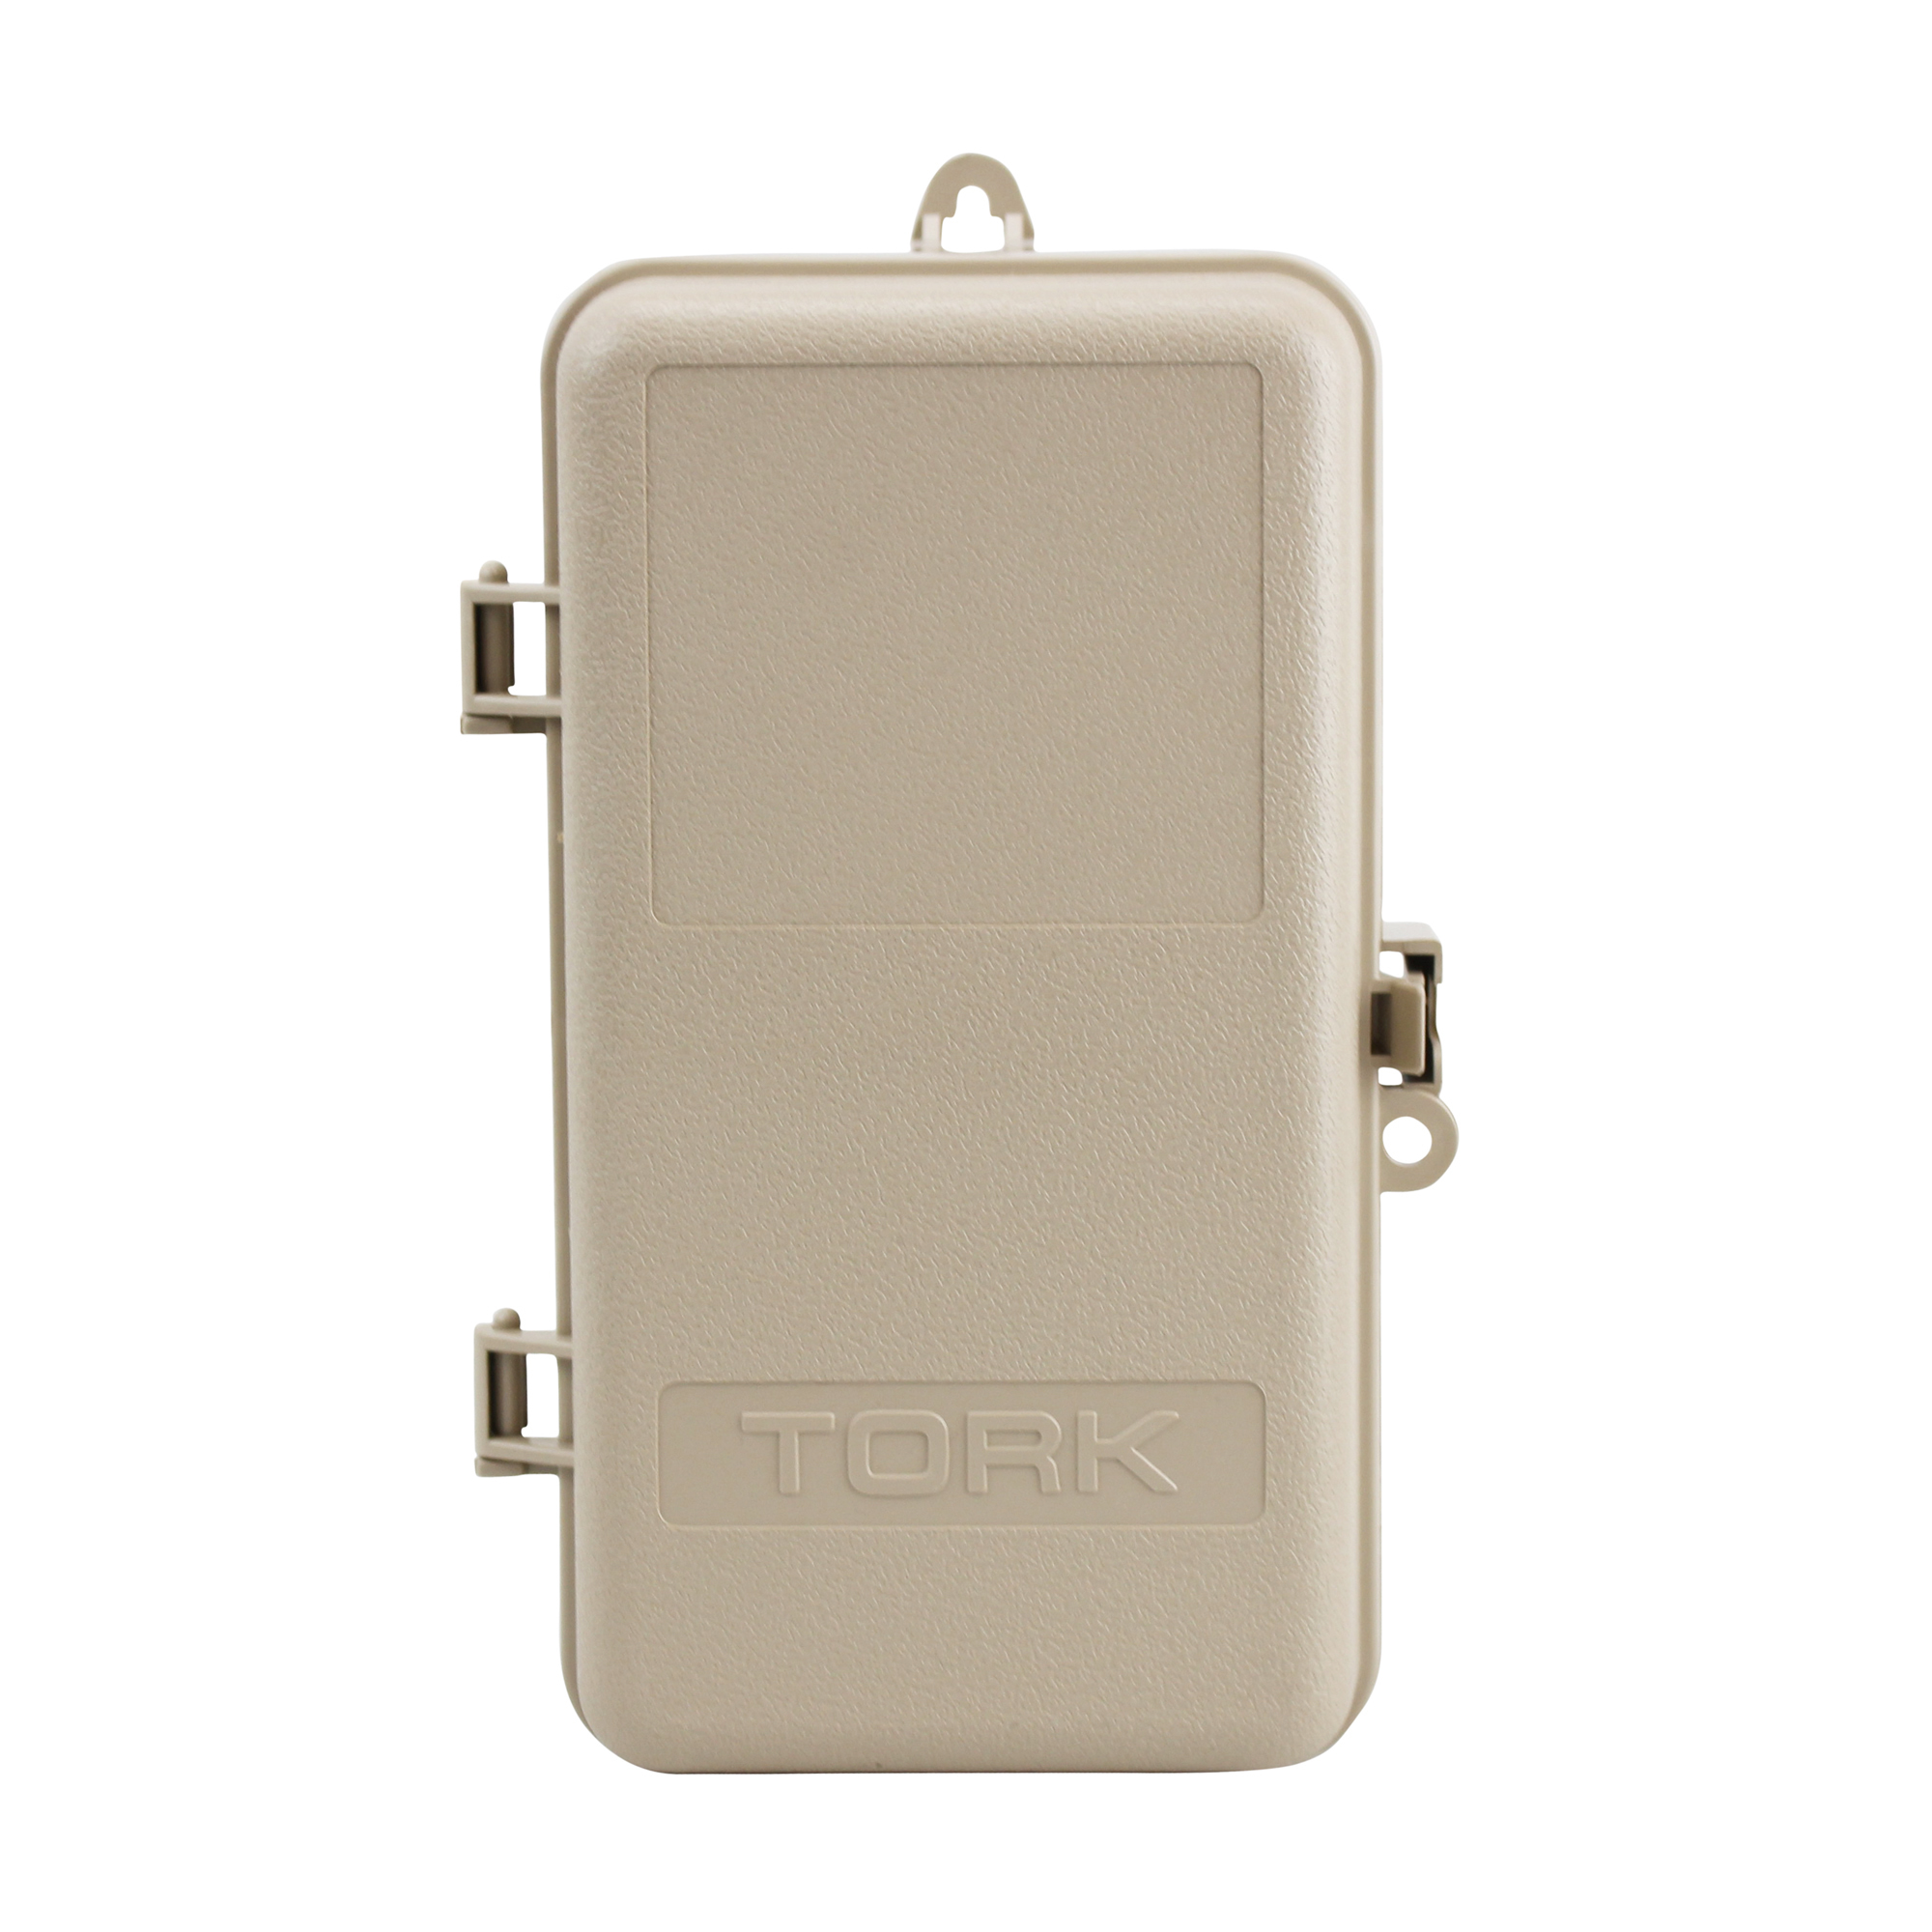 NSI Industries Tork DG280A-24 Signaling and Duty Cycle 24 Hour Time Switch with 2 Channel, 24 VAC 50/60 Hz Input Supply, SPDT Output Contact - image 4 of 4